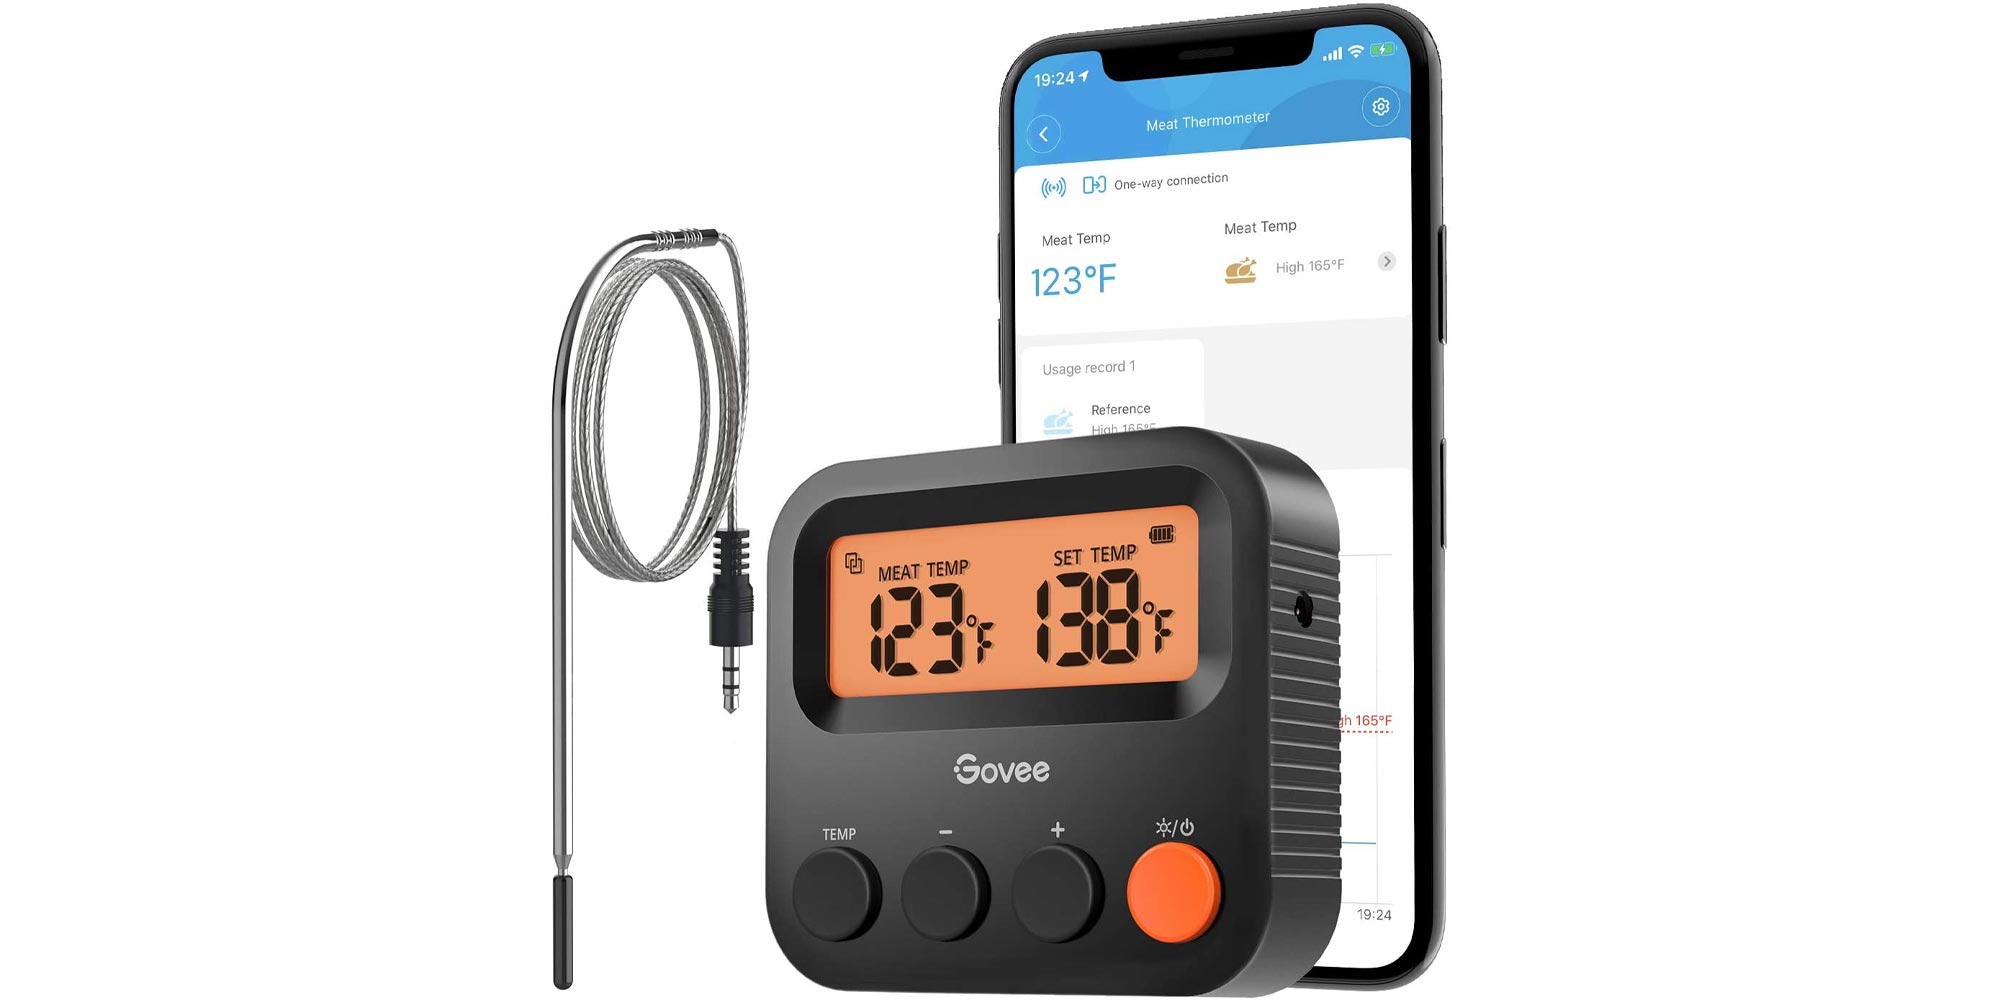 Govee's Bluetooth-enabled wireless thermometer/hygrometer drops to $11